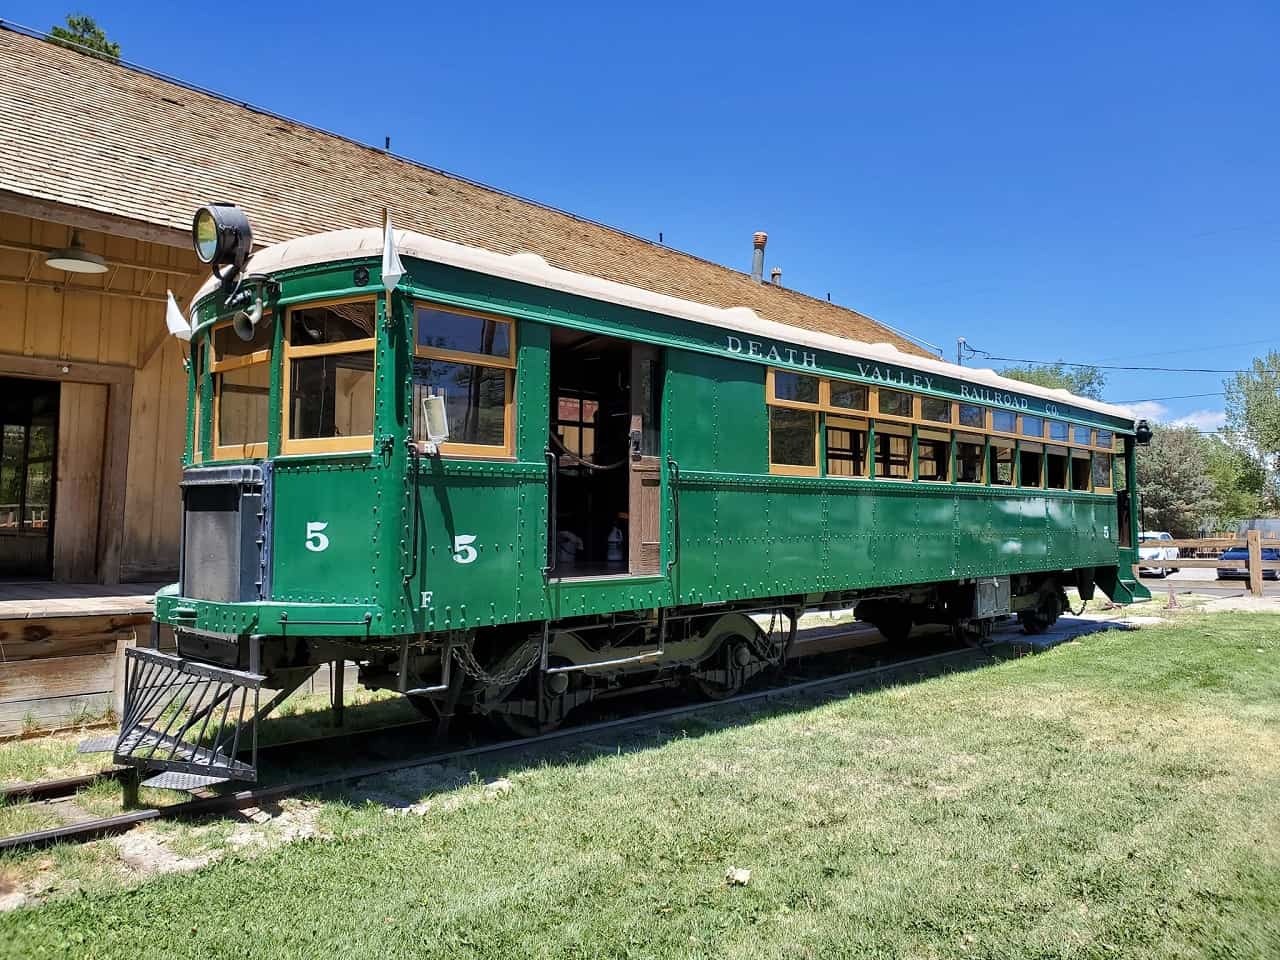 Laws Railroad Museum and Historical Site - Bishop, CA